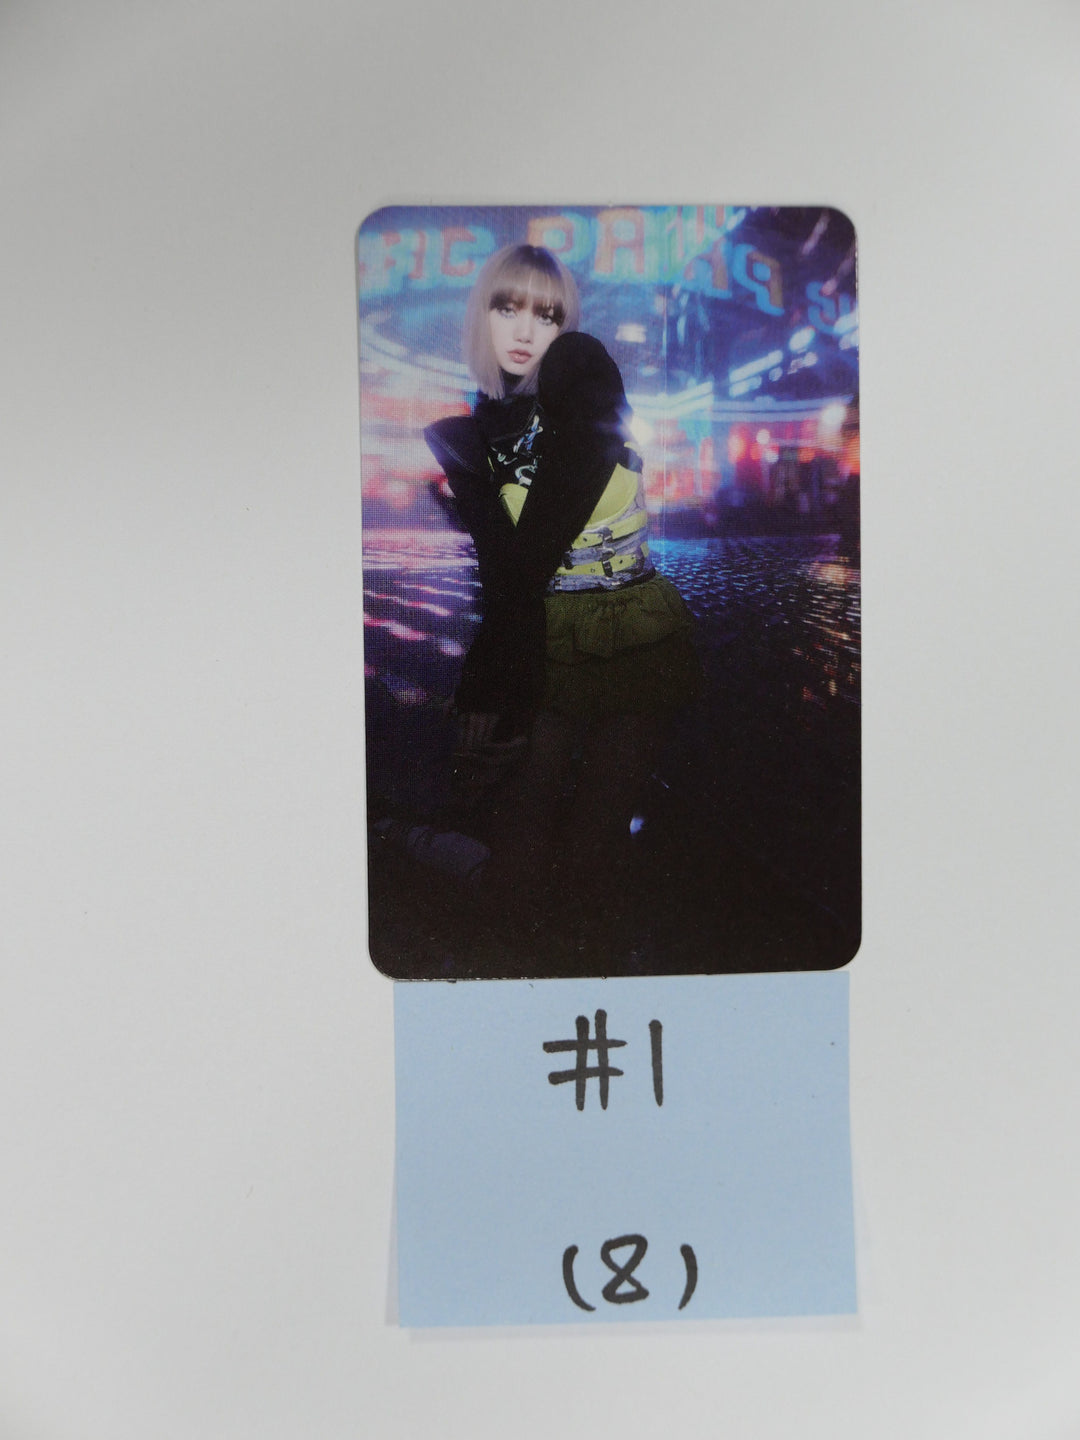 Lisa (of Blackpink) "LALISA" 1st Single - Official Photocard [Updated 11/1]